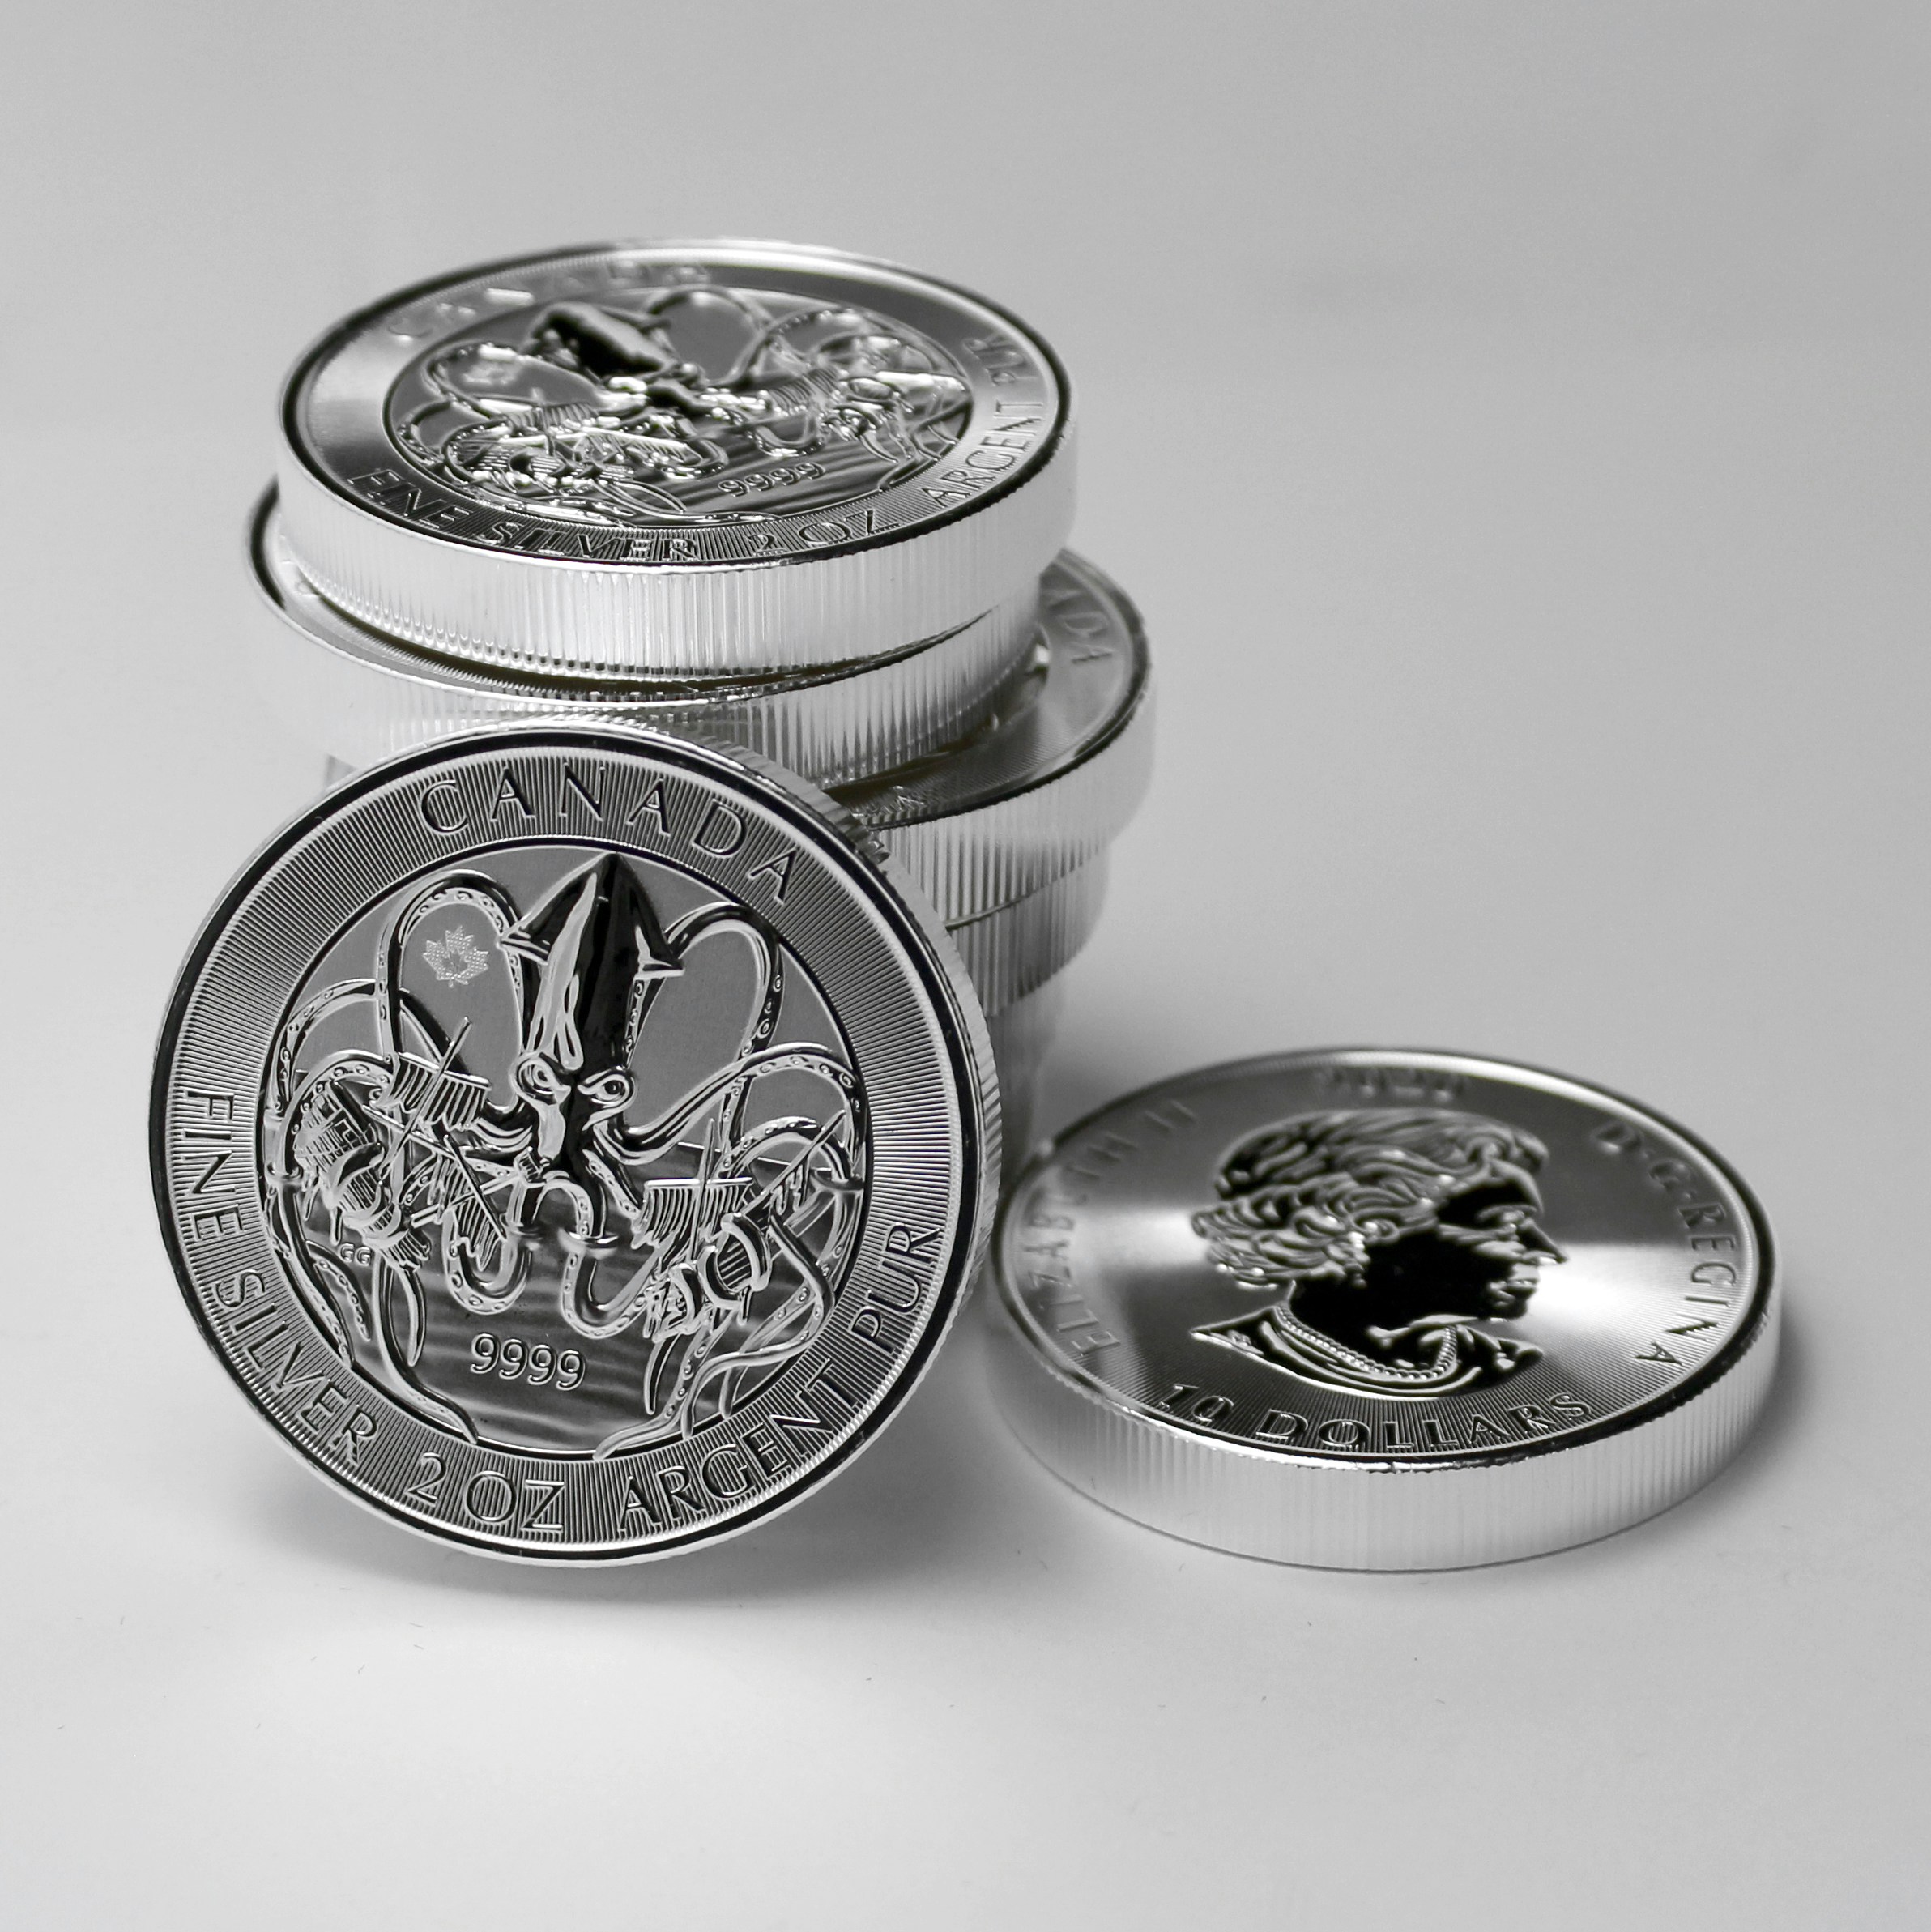 The silver investment coin minted by the Royal Canadian Mint in 2020 from the purest 99.99% silver weighing 2 oz (62.2 g) is part of the Creatures of the North series. The dreaded sea monster - kraken - was chosen for the opening coin. As part of a new series that revives Nordic legends and their mysterious monsters, two coins will be issued annually. If you use our photos, please add credit to https://zlataky.cz, when possible